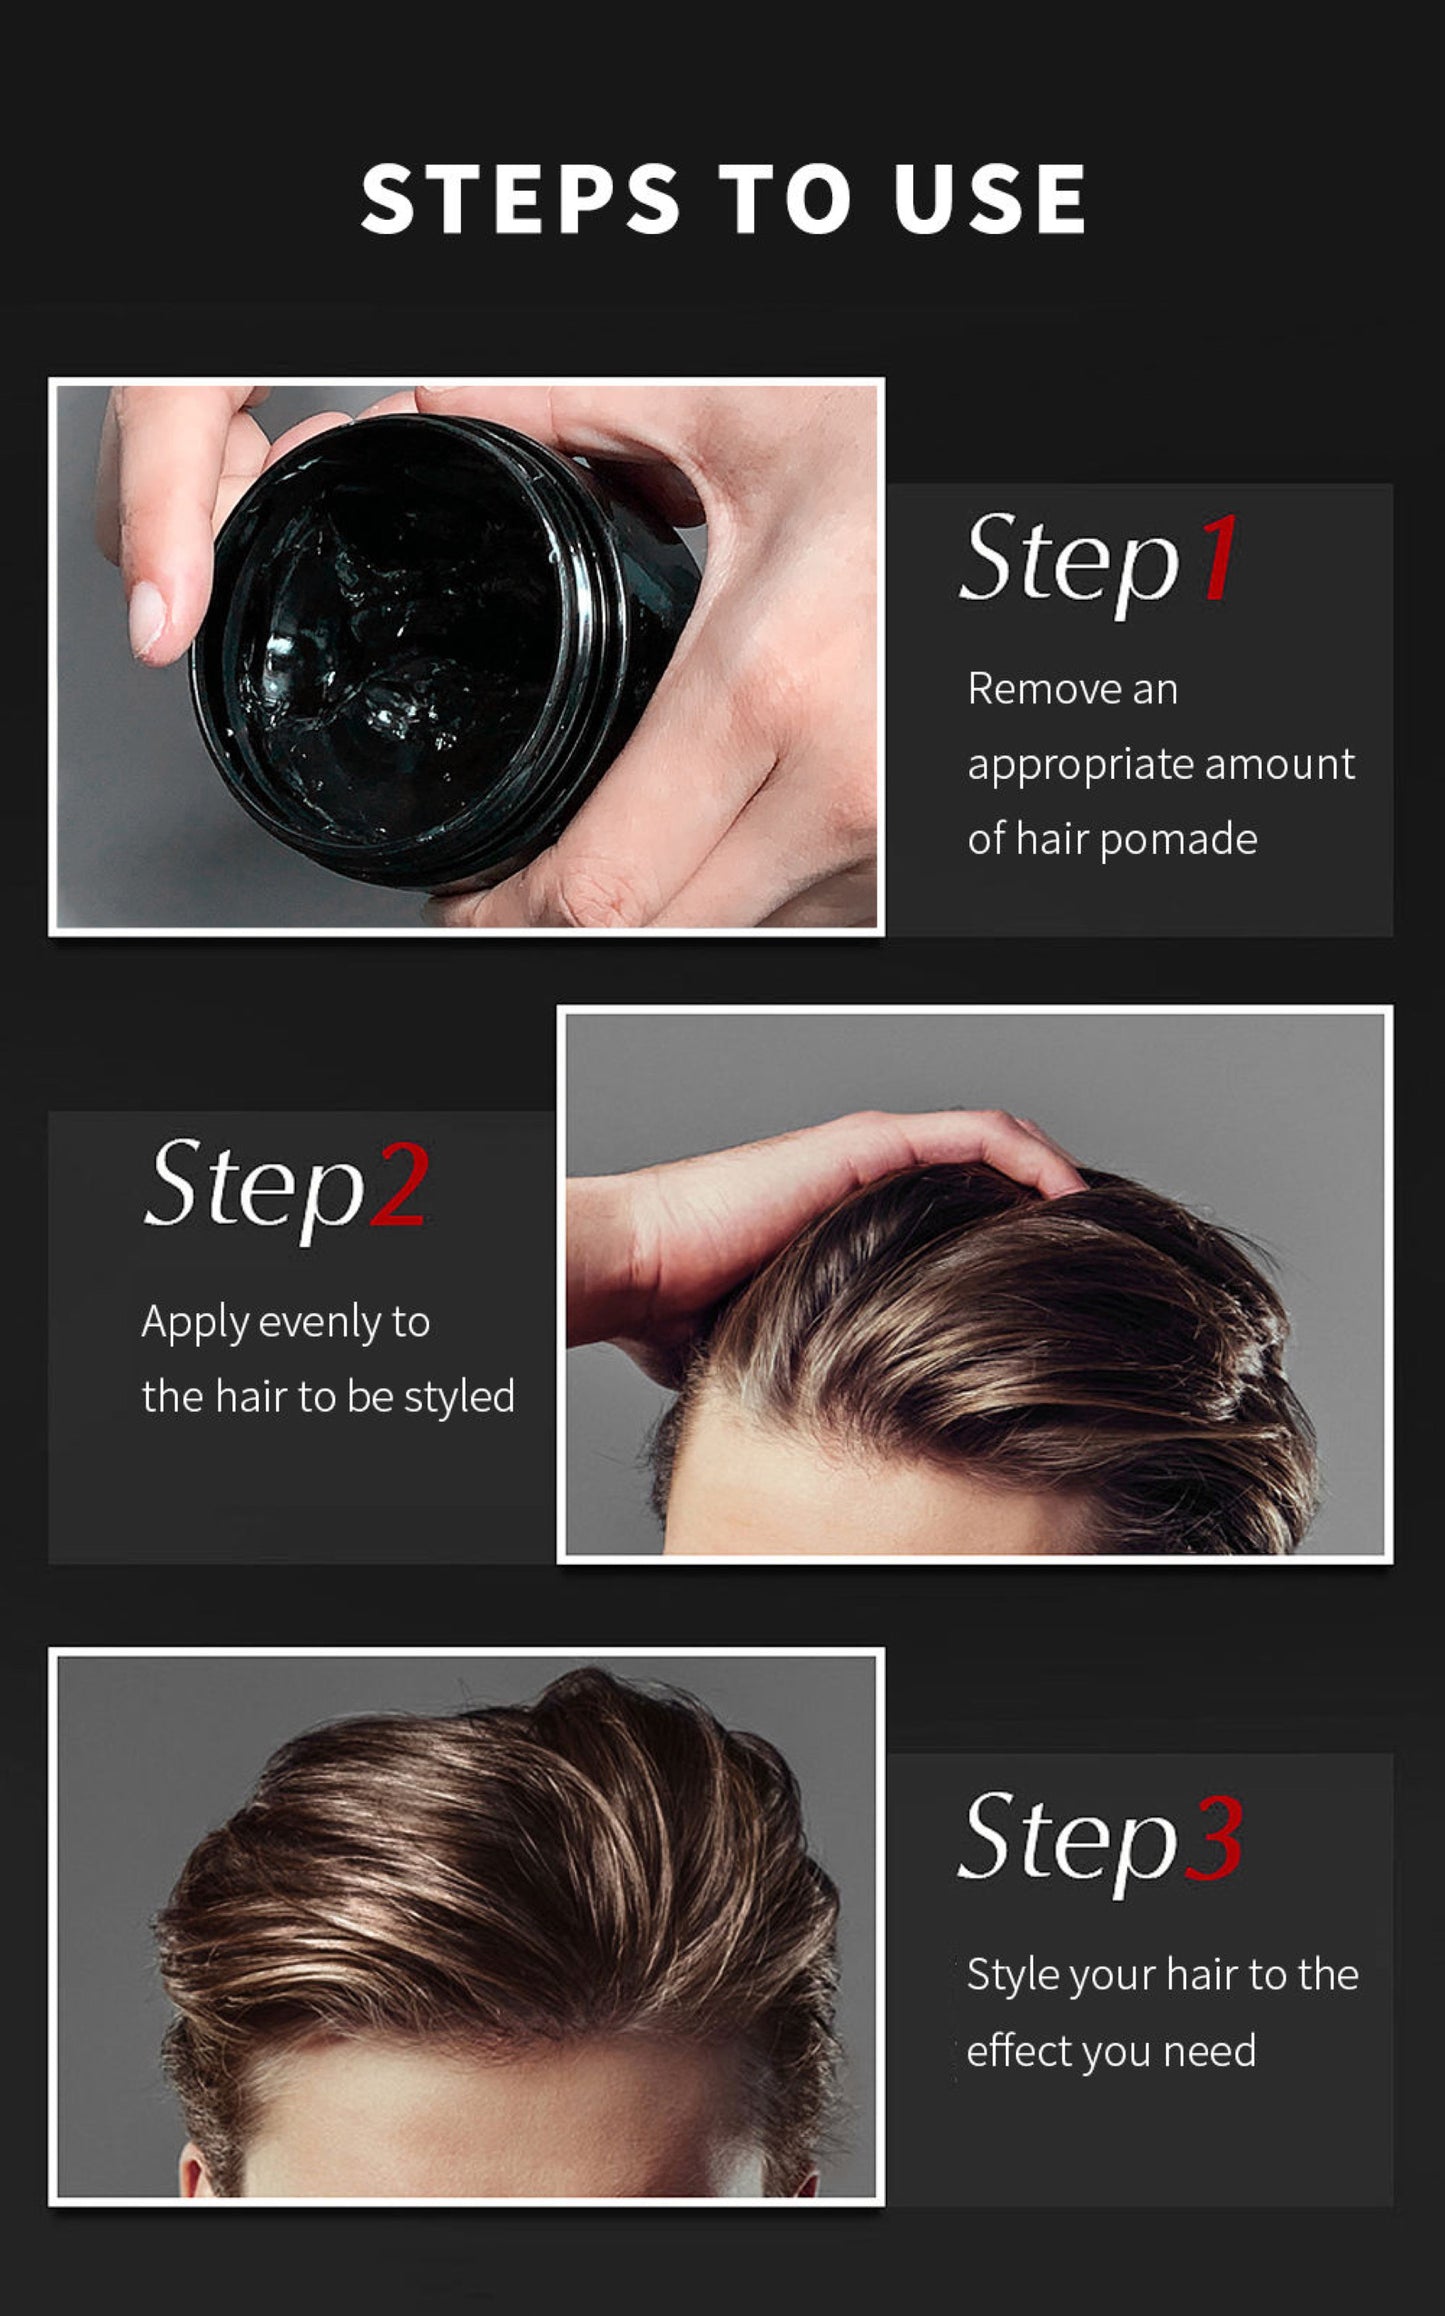 CLASSIC POMADE - FLEXIBLE STRONG HOLD